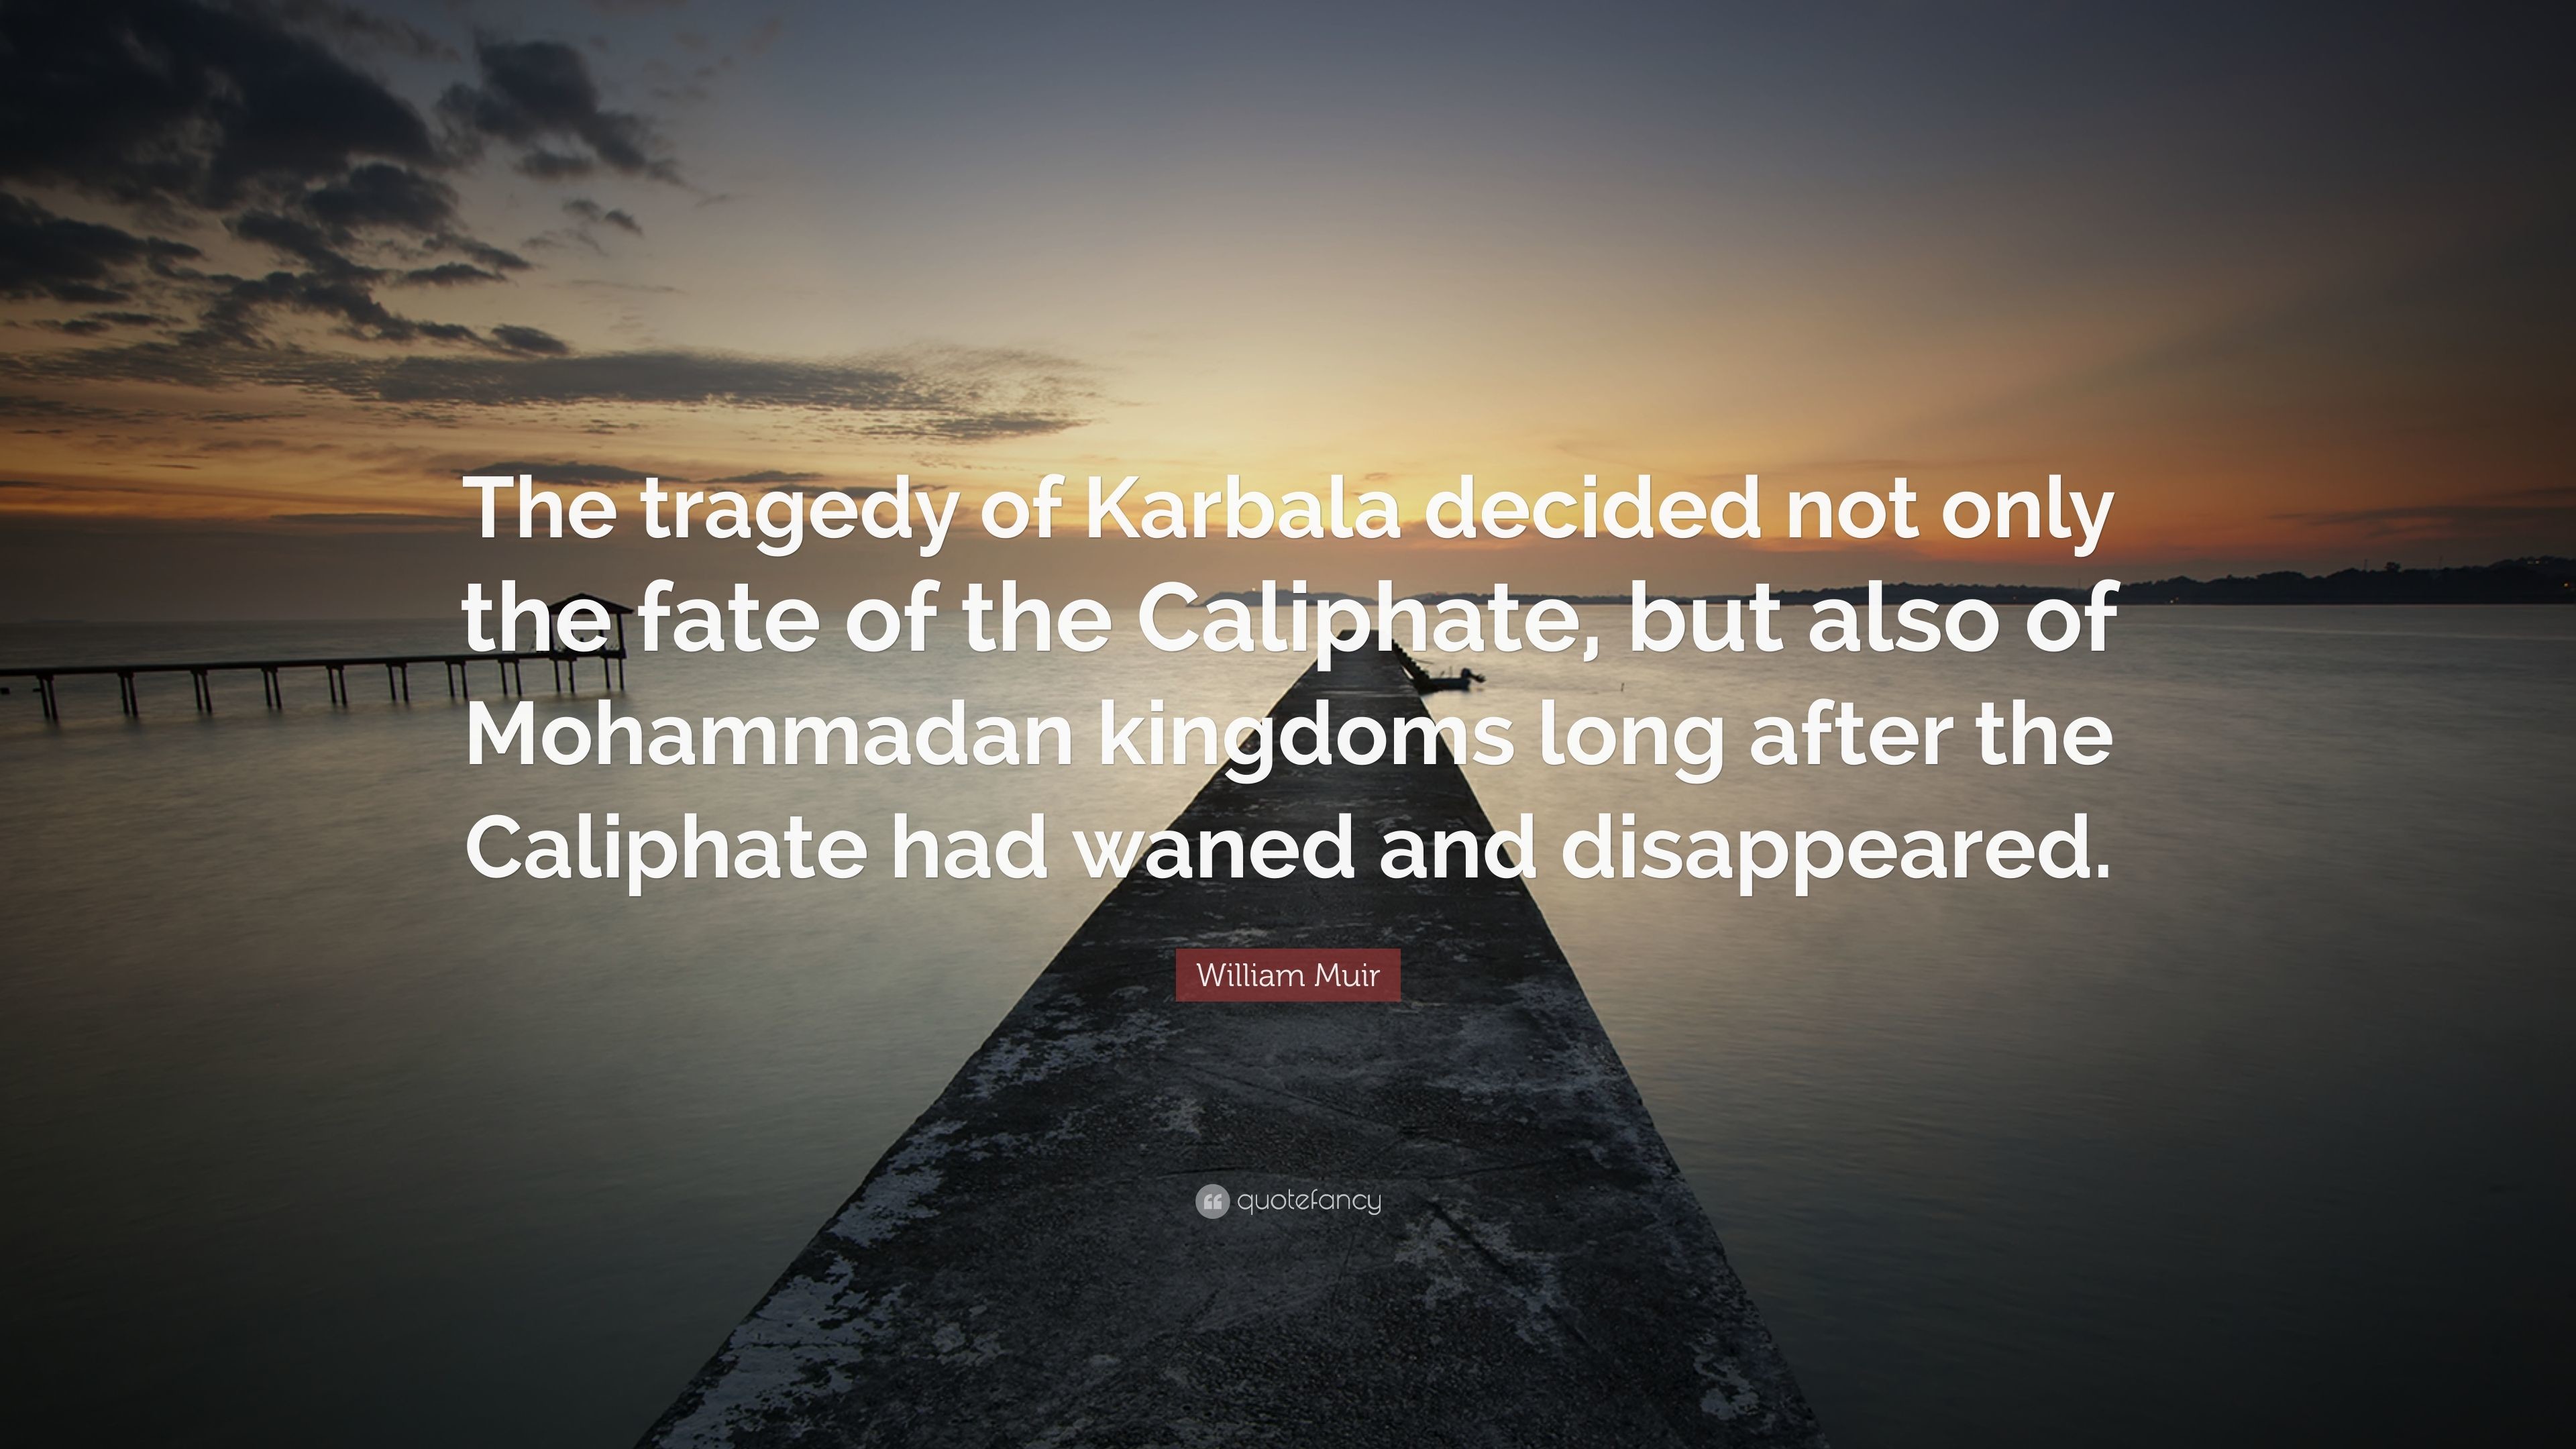 3840x2160 William Muir Quote: “The tragedy of Karbala decided not only the fate of the